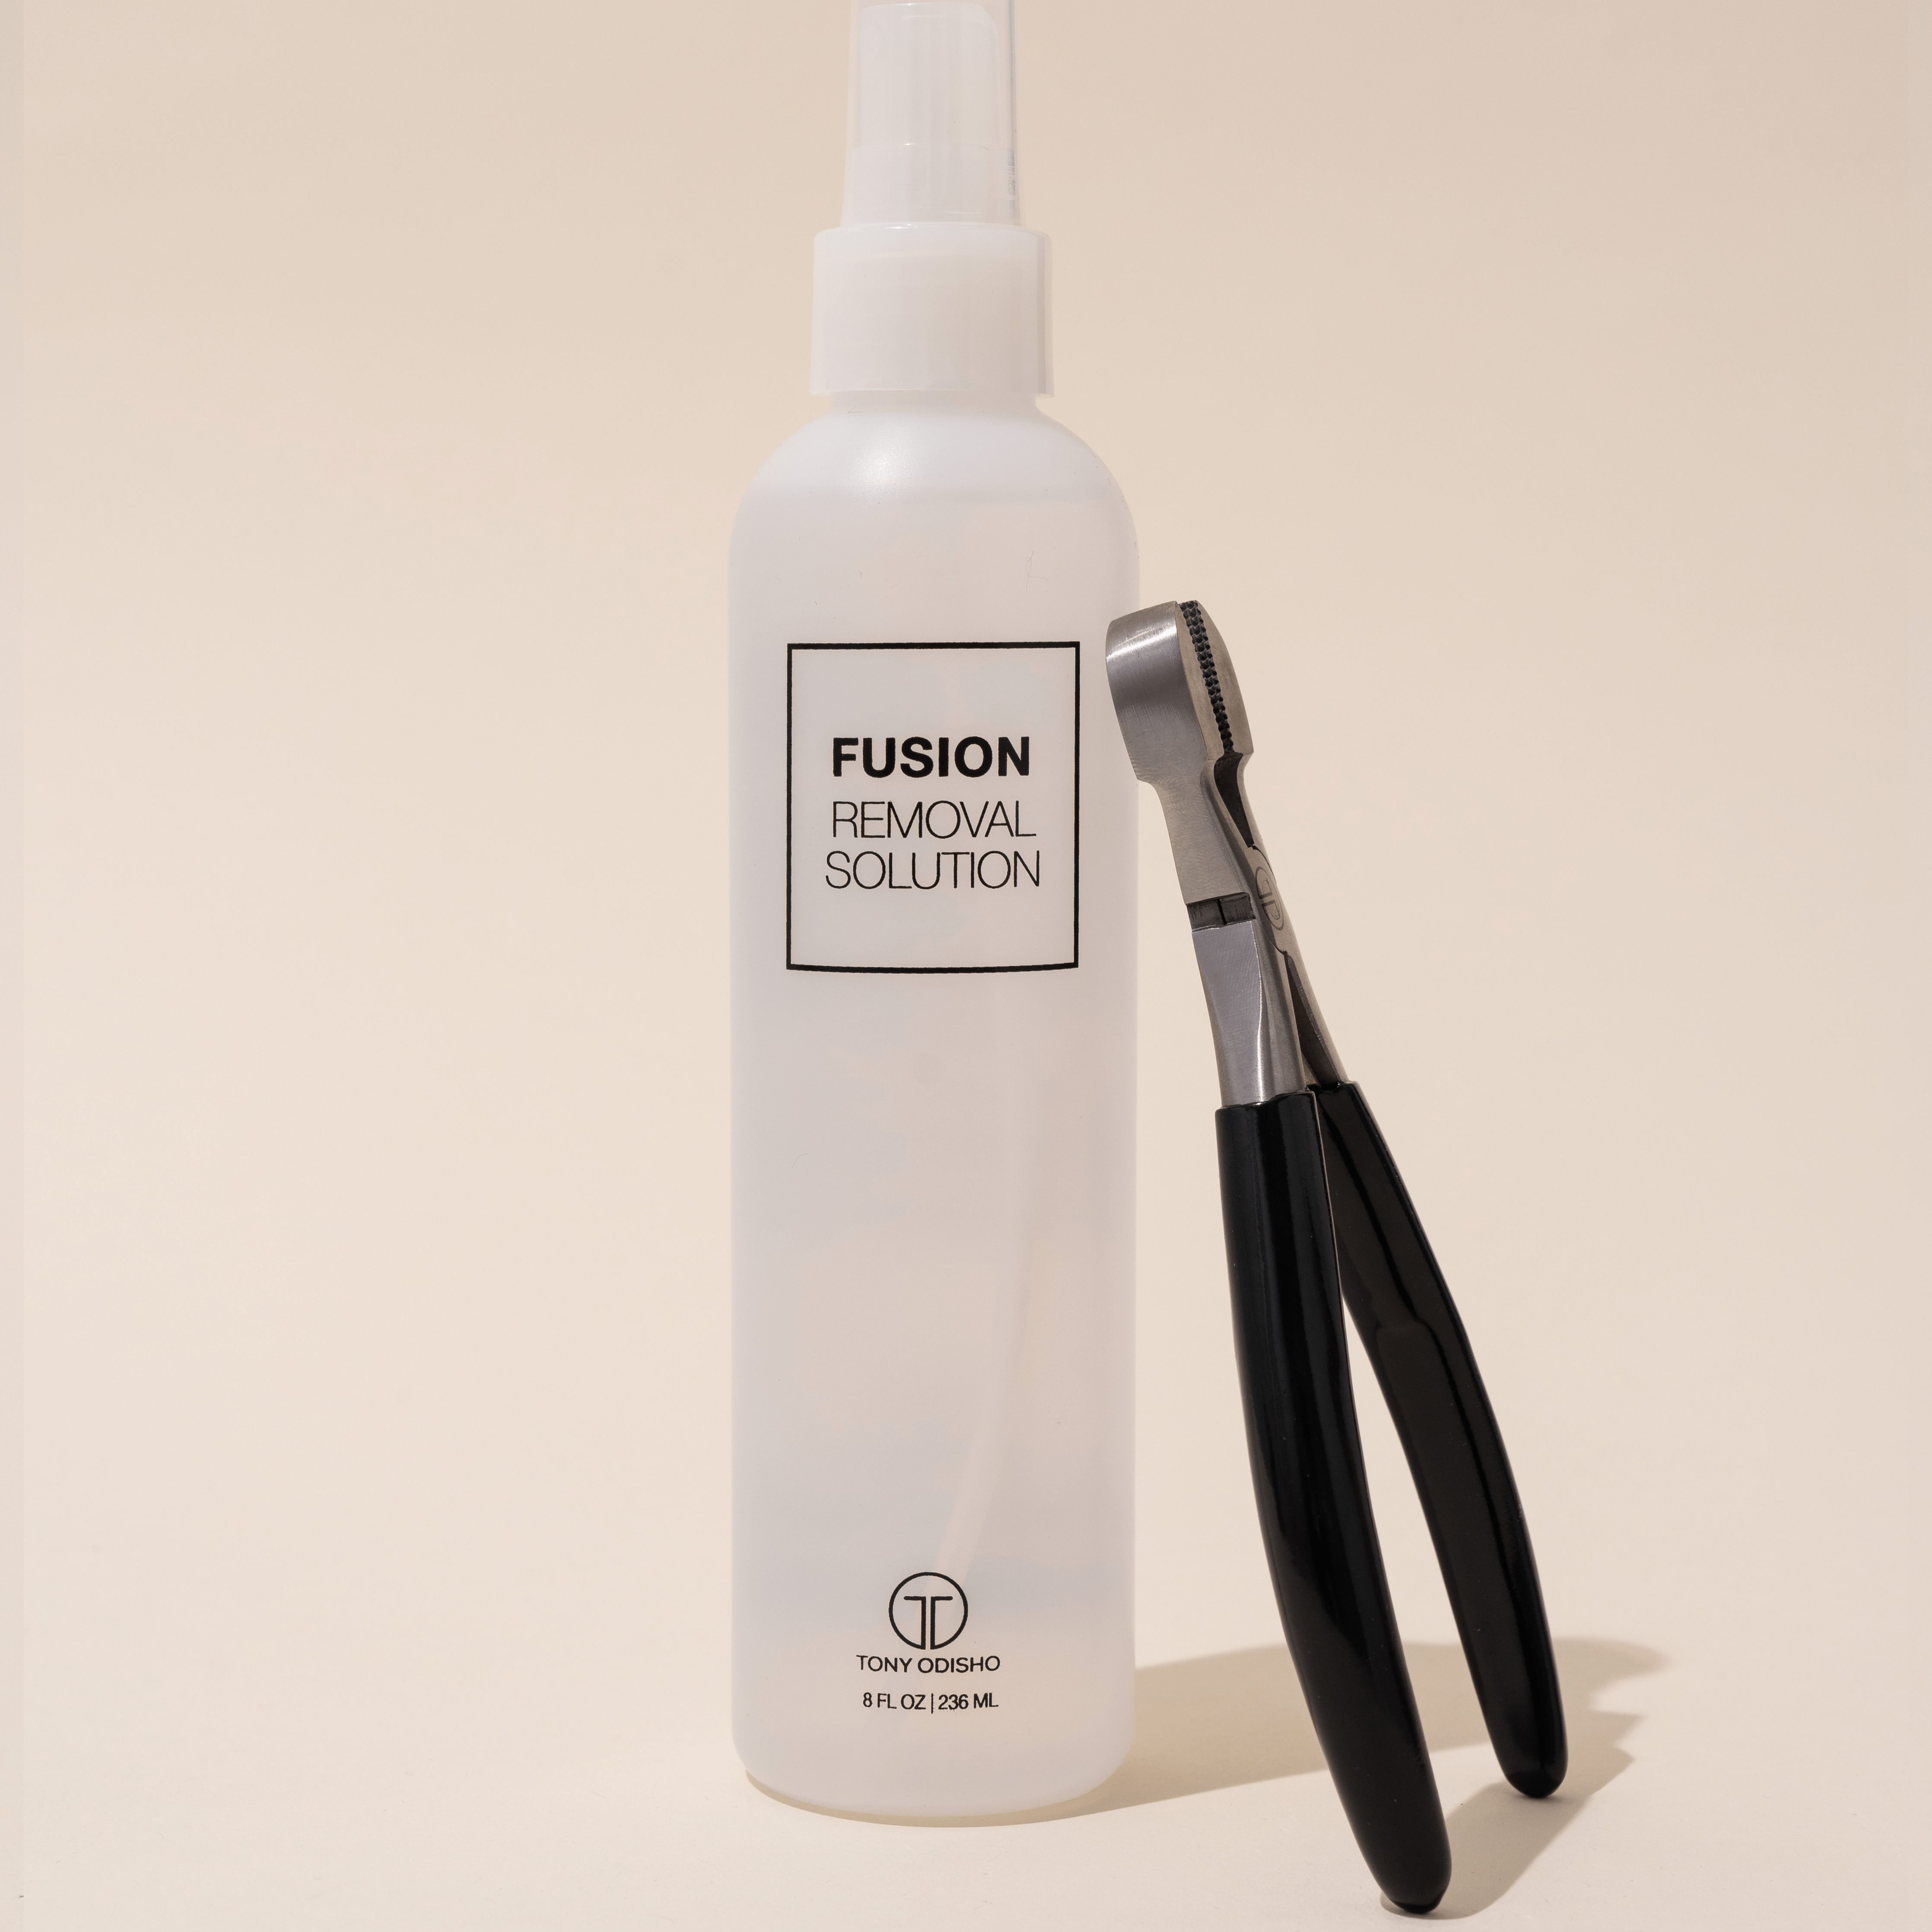 Fusion Hair Extensions Removal Solution 8oz